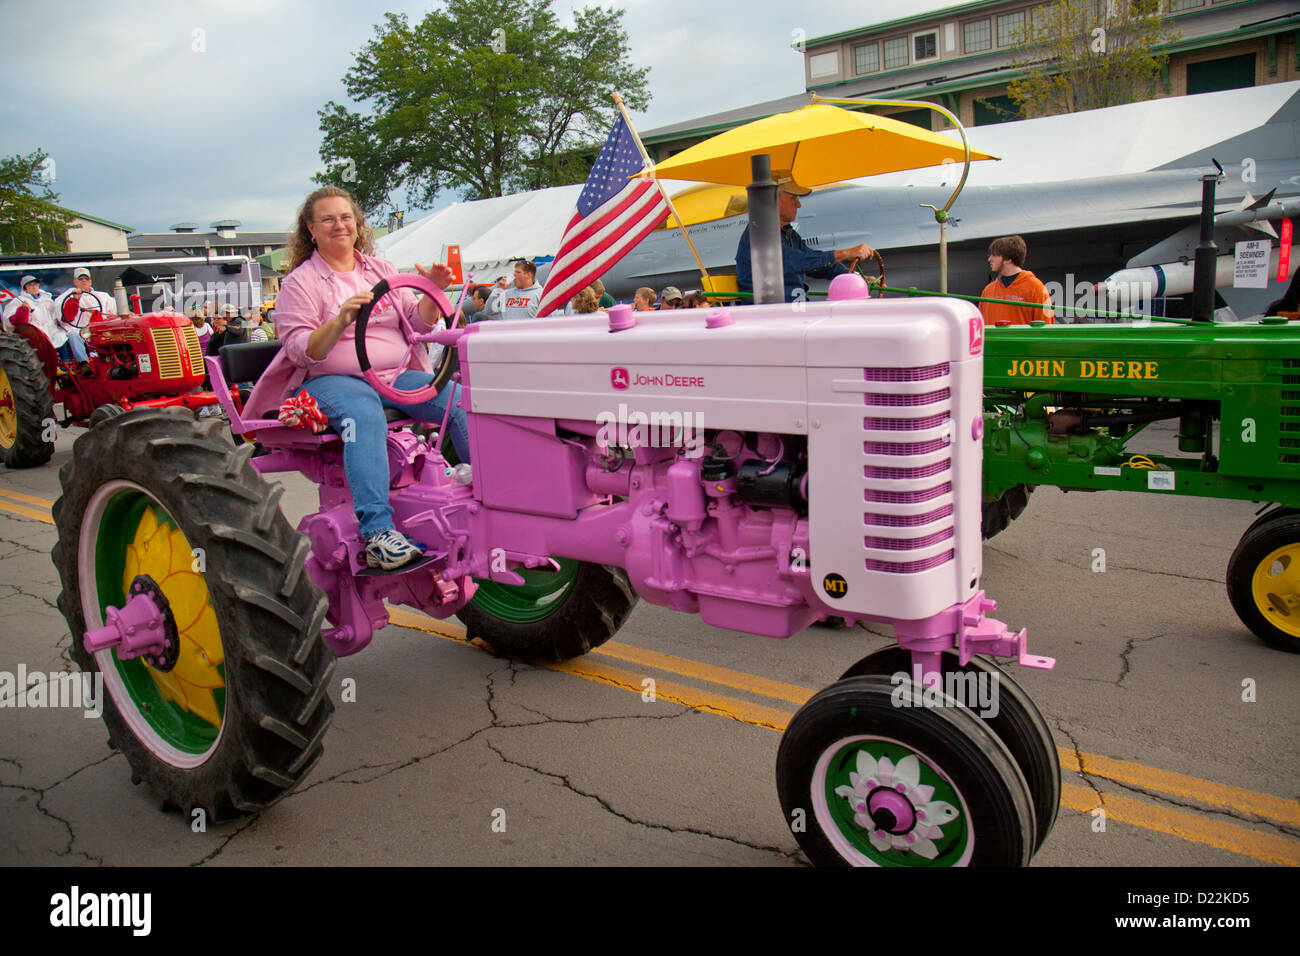 tractor parade at New York State Fair Stock Photo